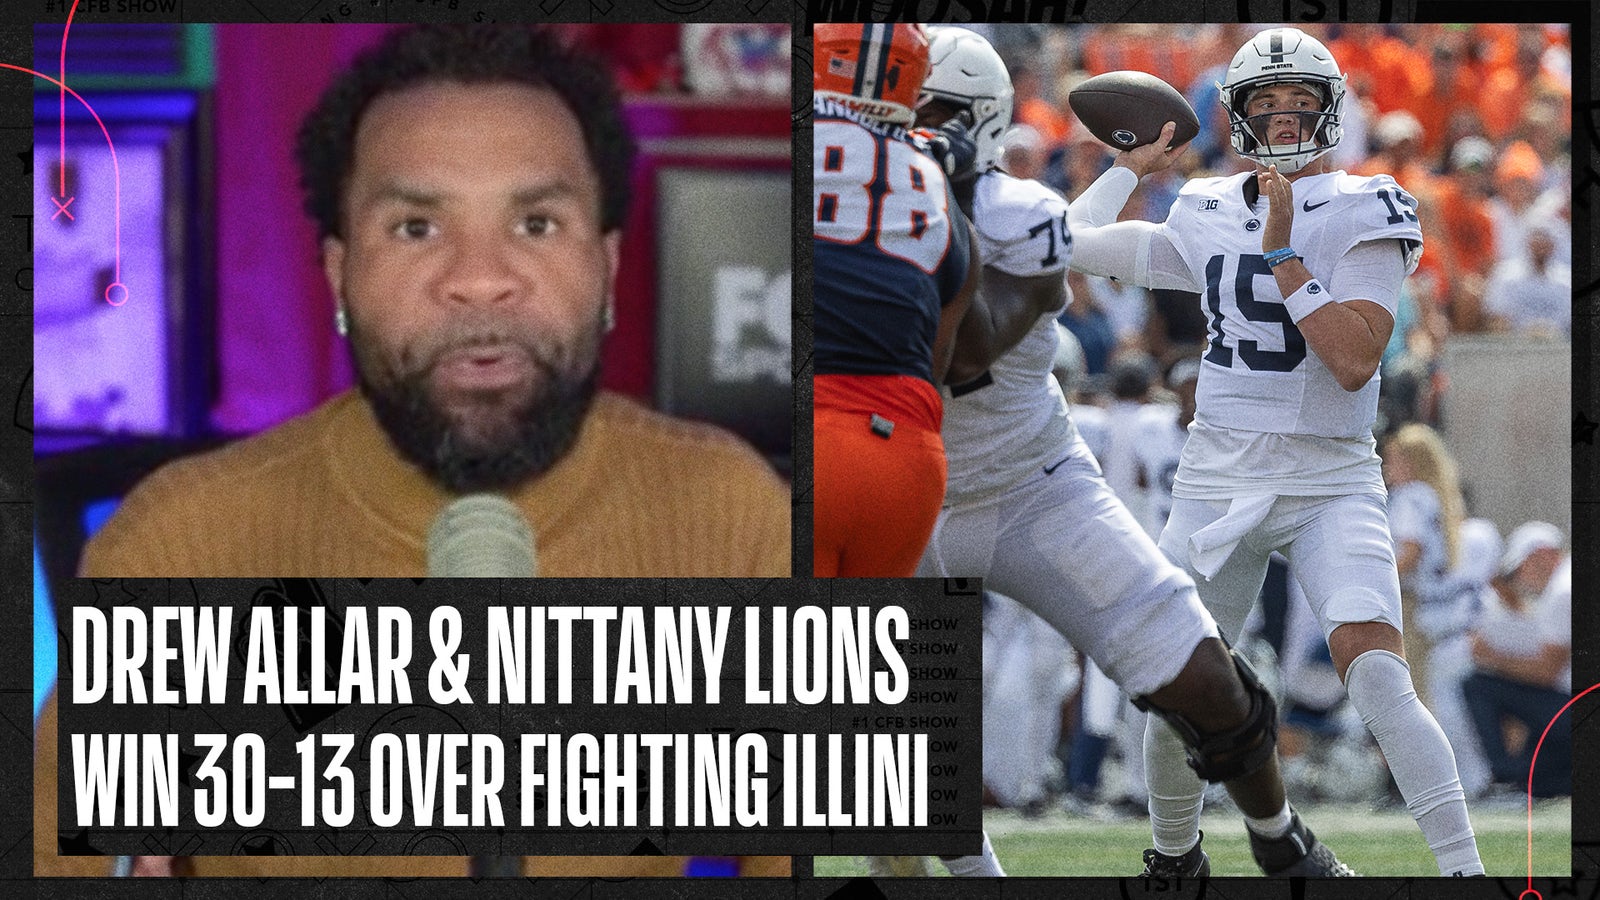 Here's what we learned from Penn State's win over Illinois